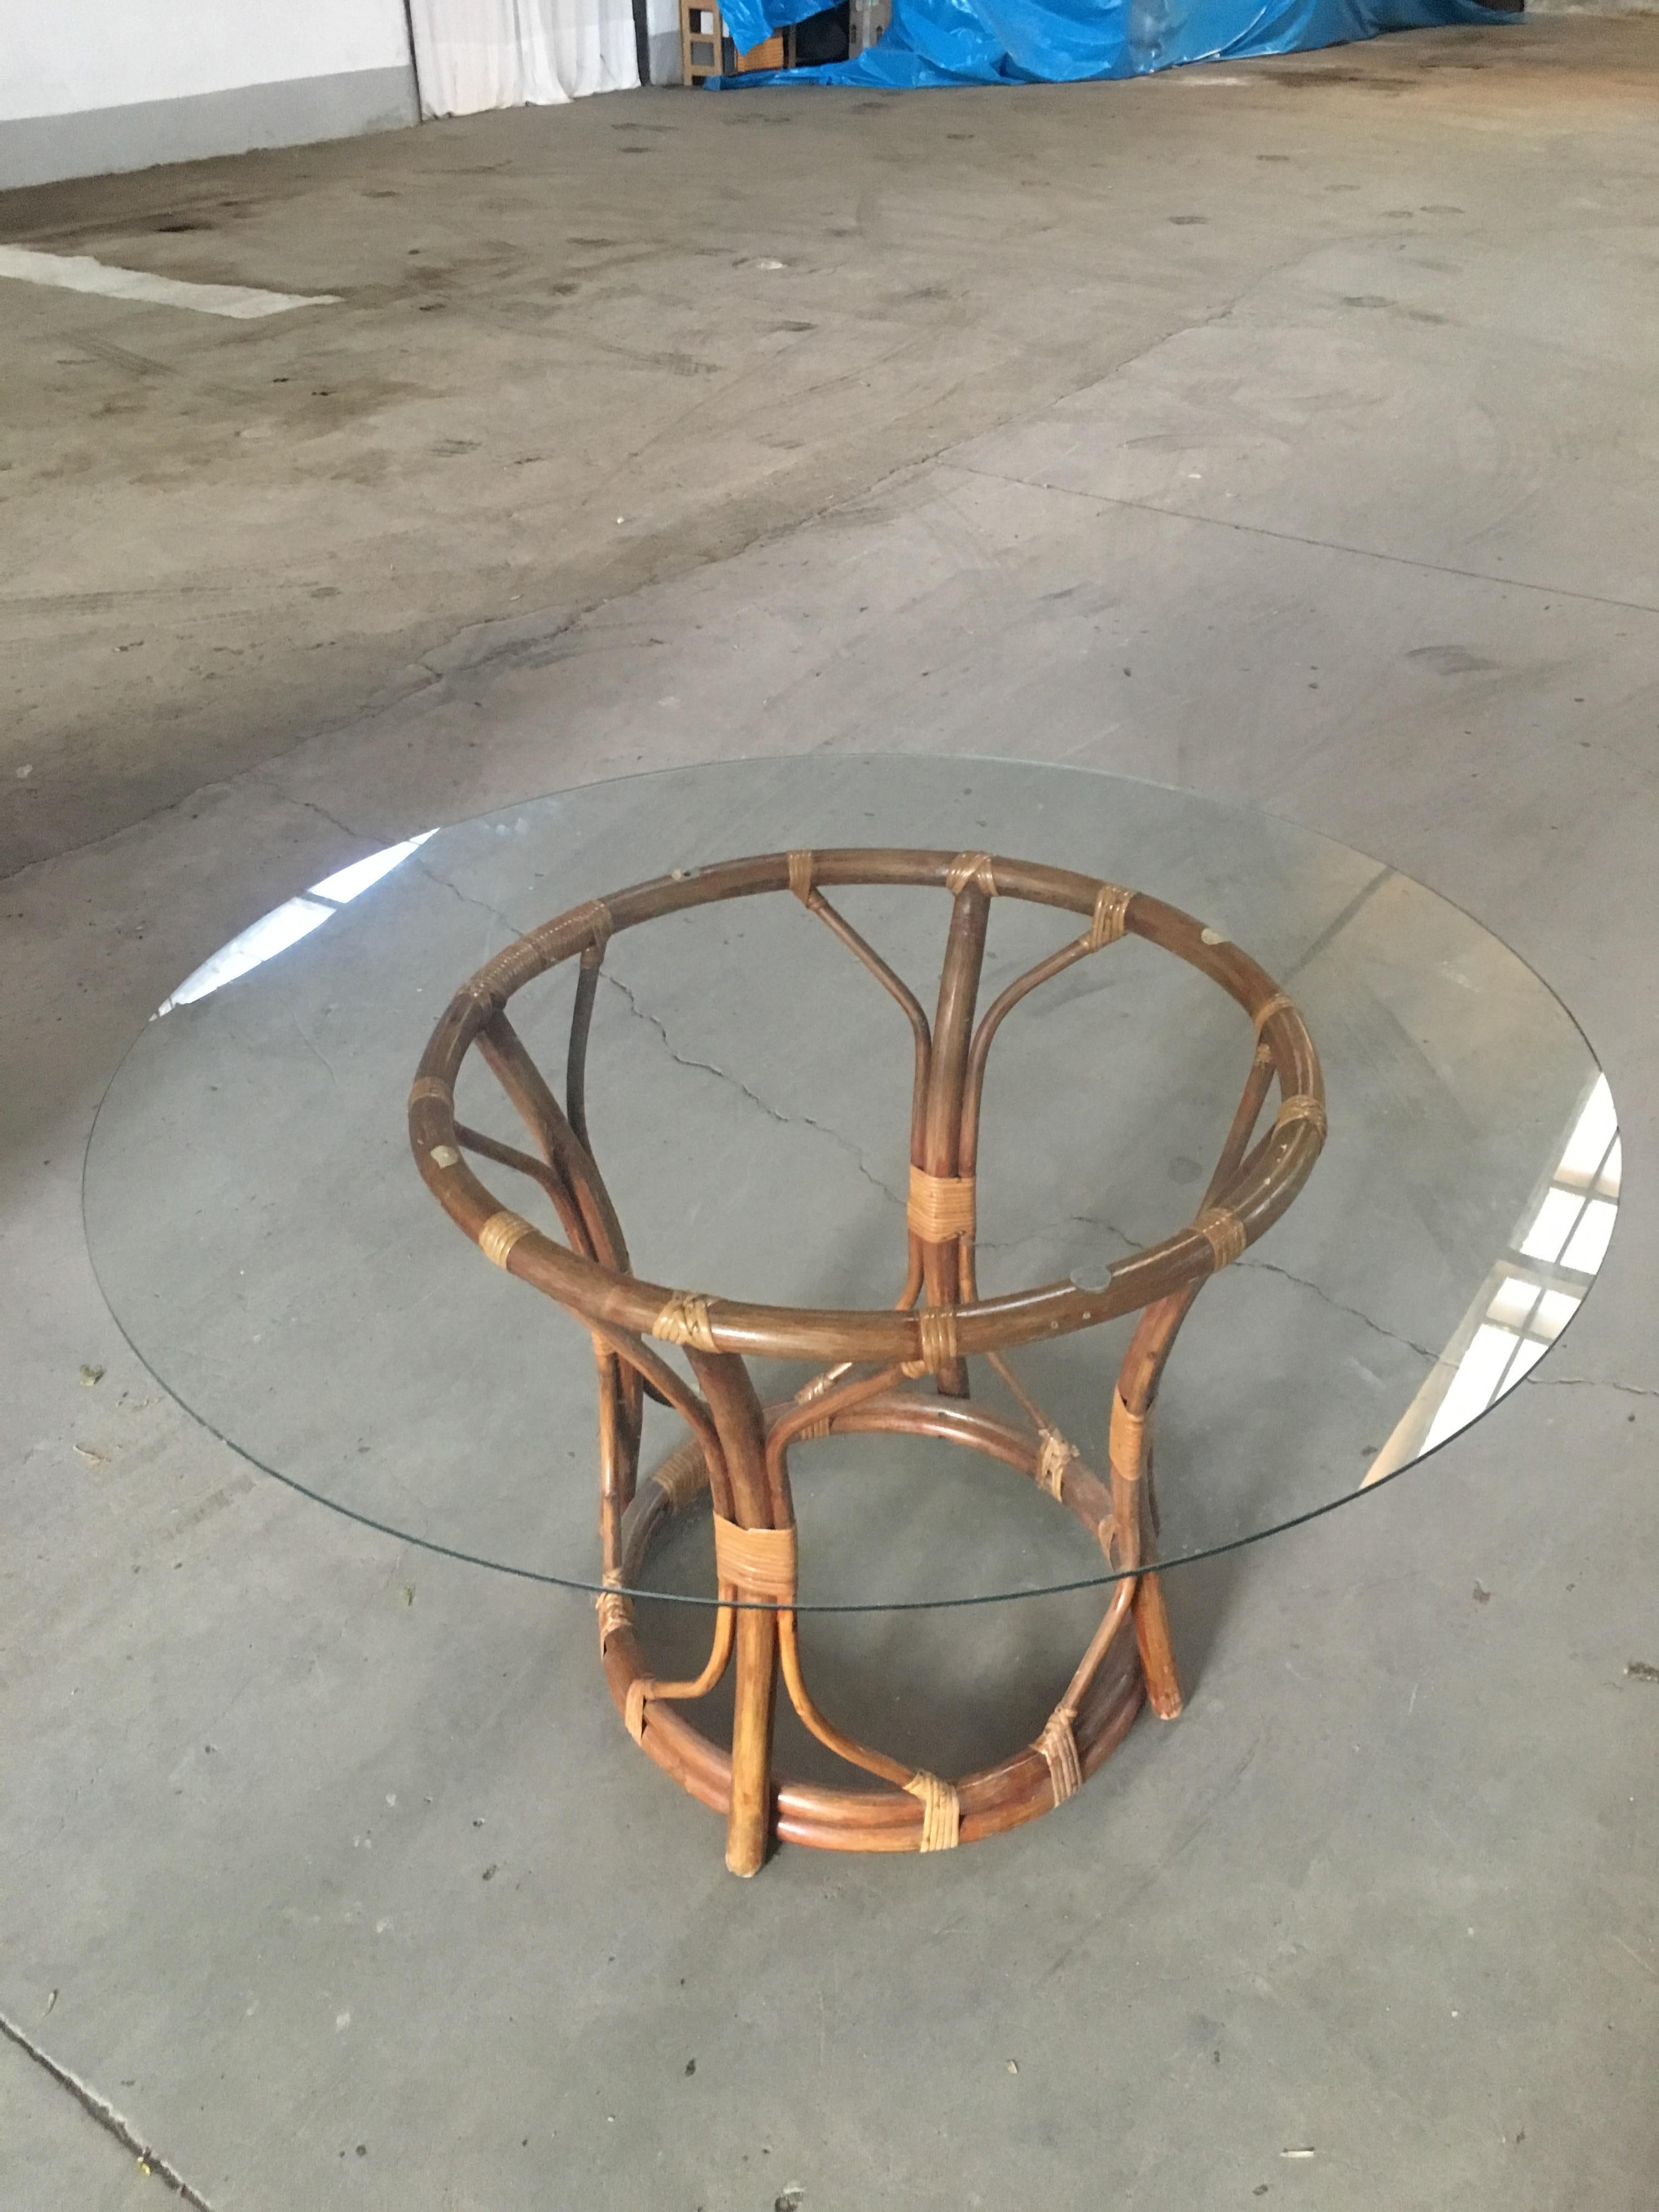 Mid-Century Modern Italian bamboo table with glass top,
The table could come with its 4 chairs as shown in the Photo. Price on demand.